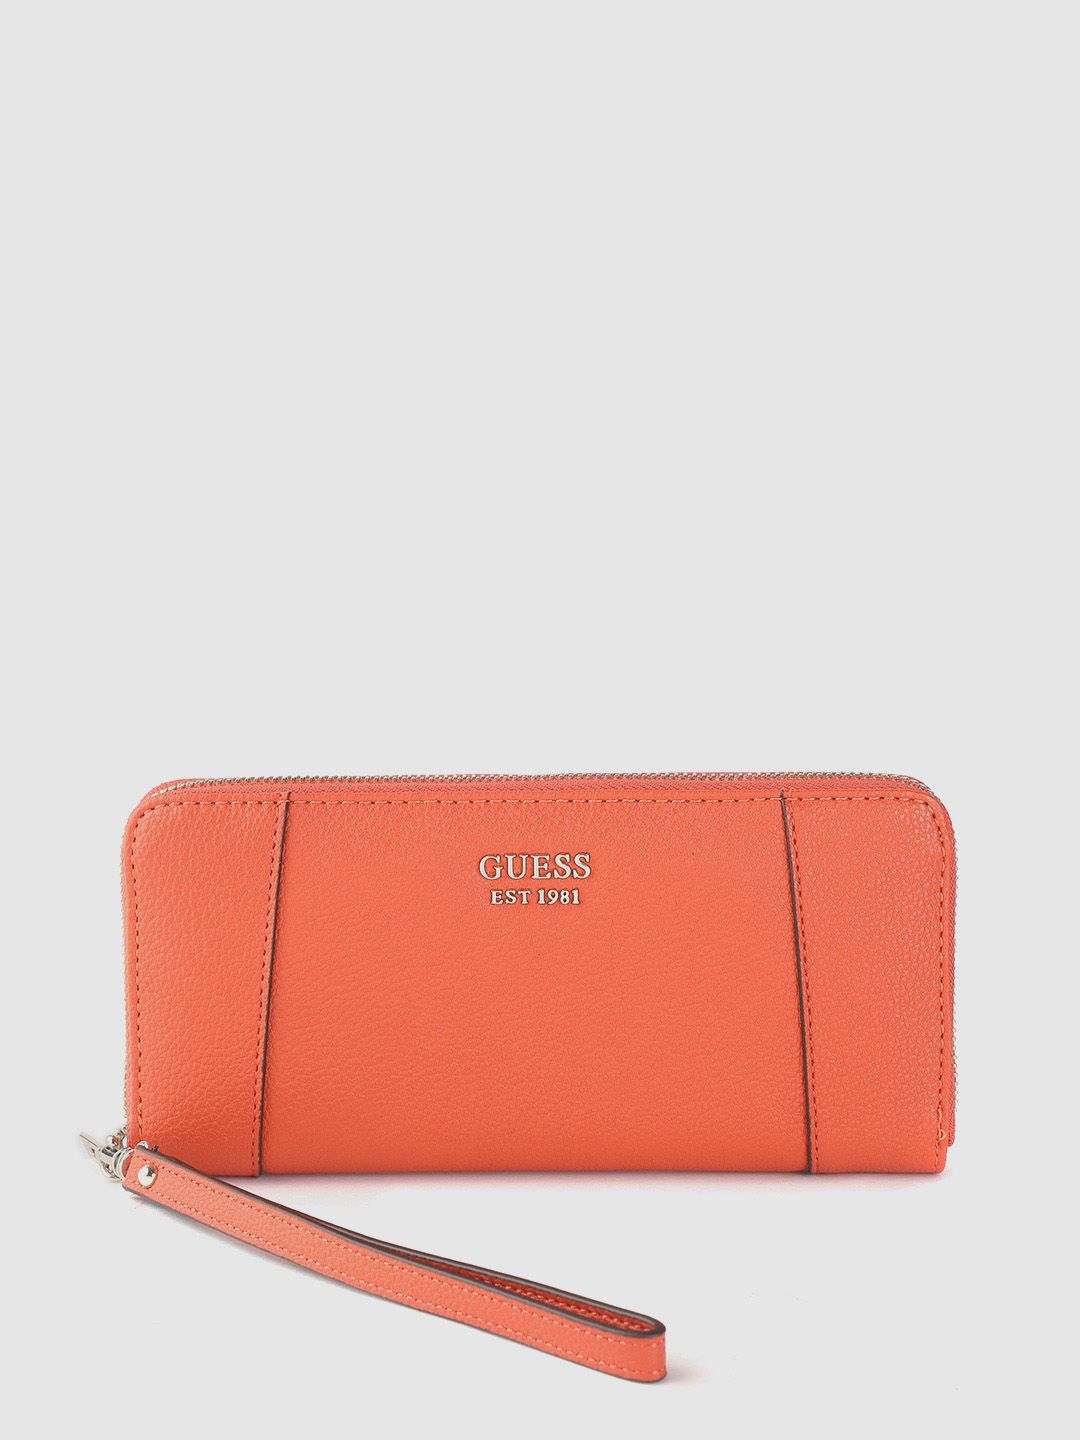 GUESS Women Coral Orange Solid Zip Around Wallet Price in India